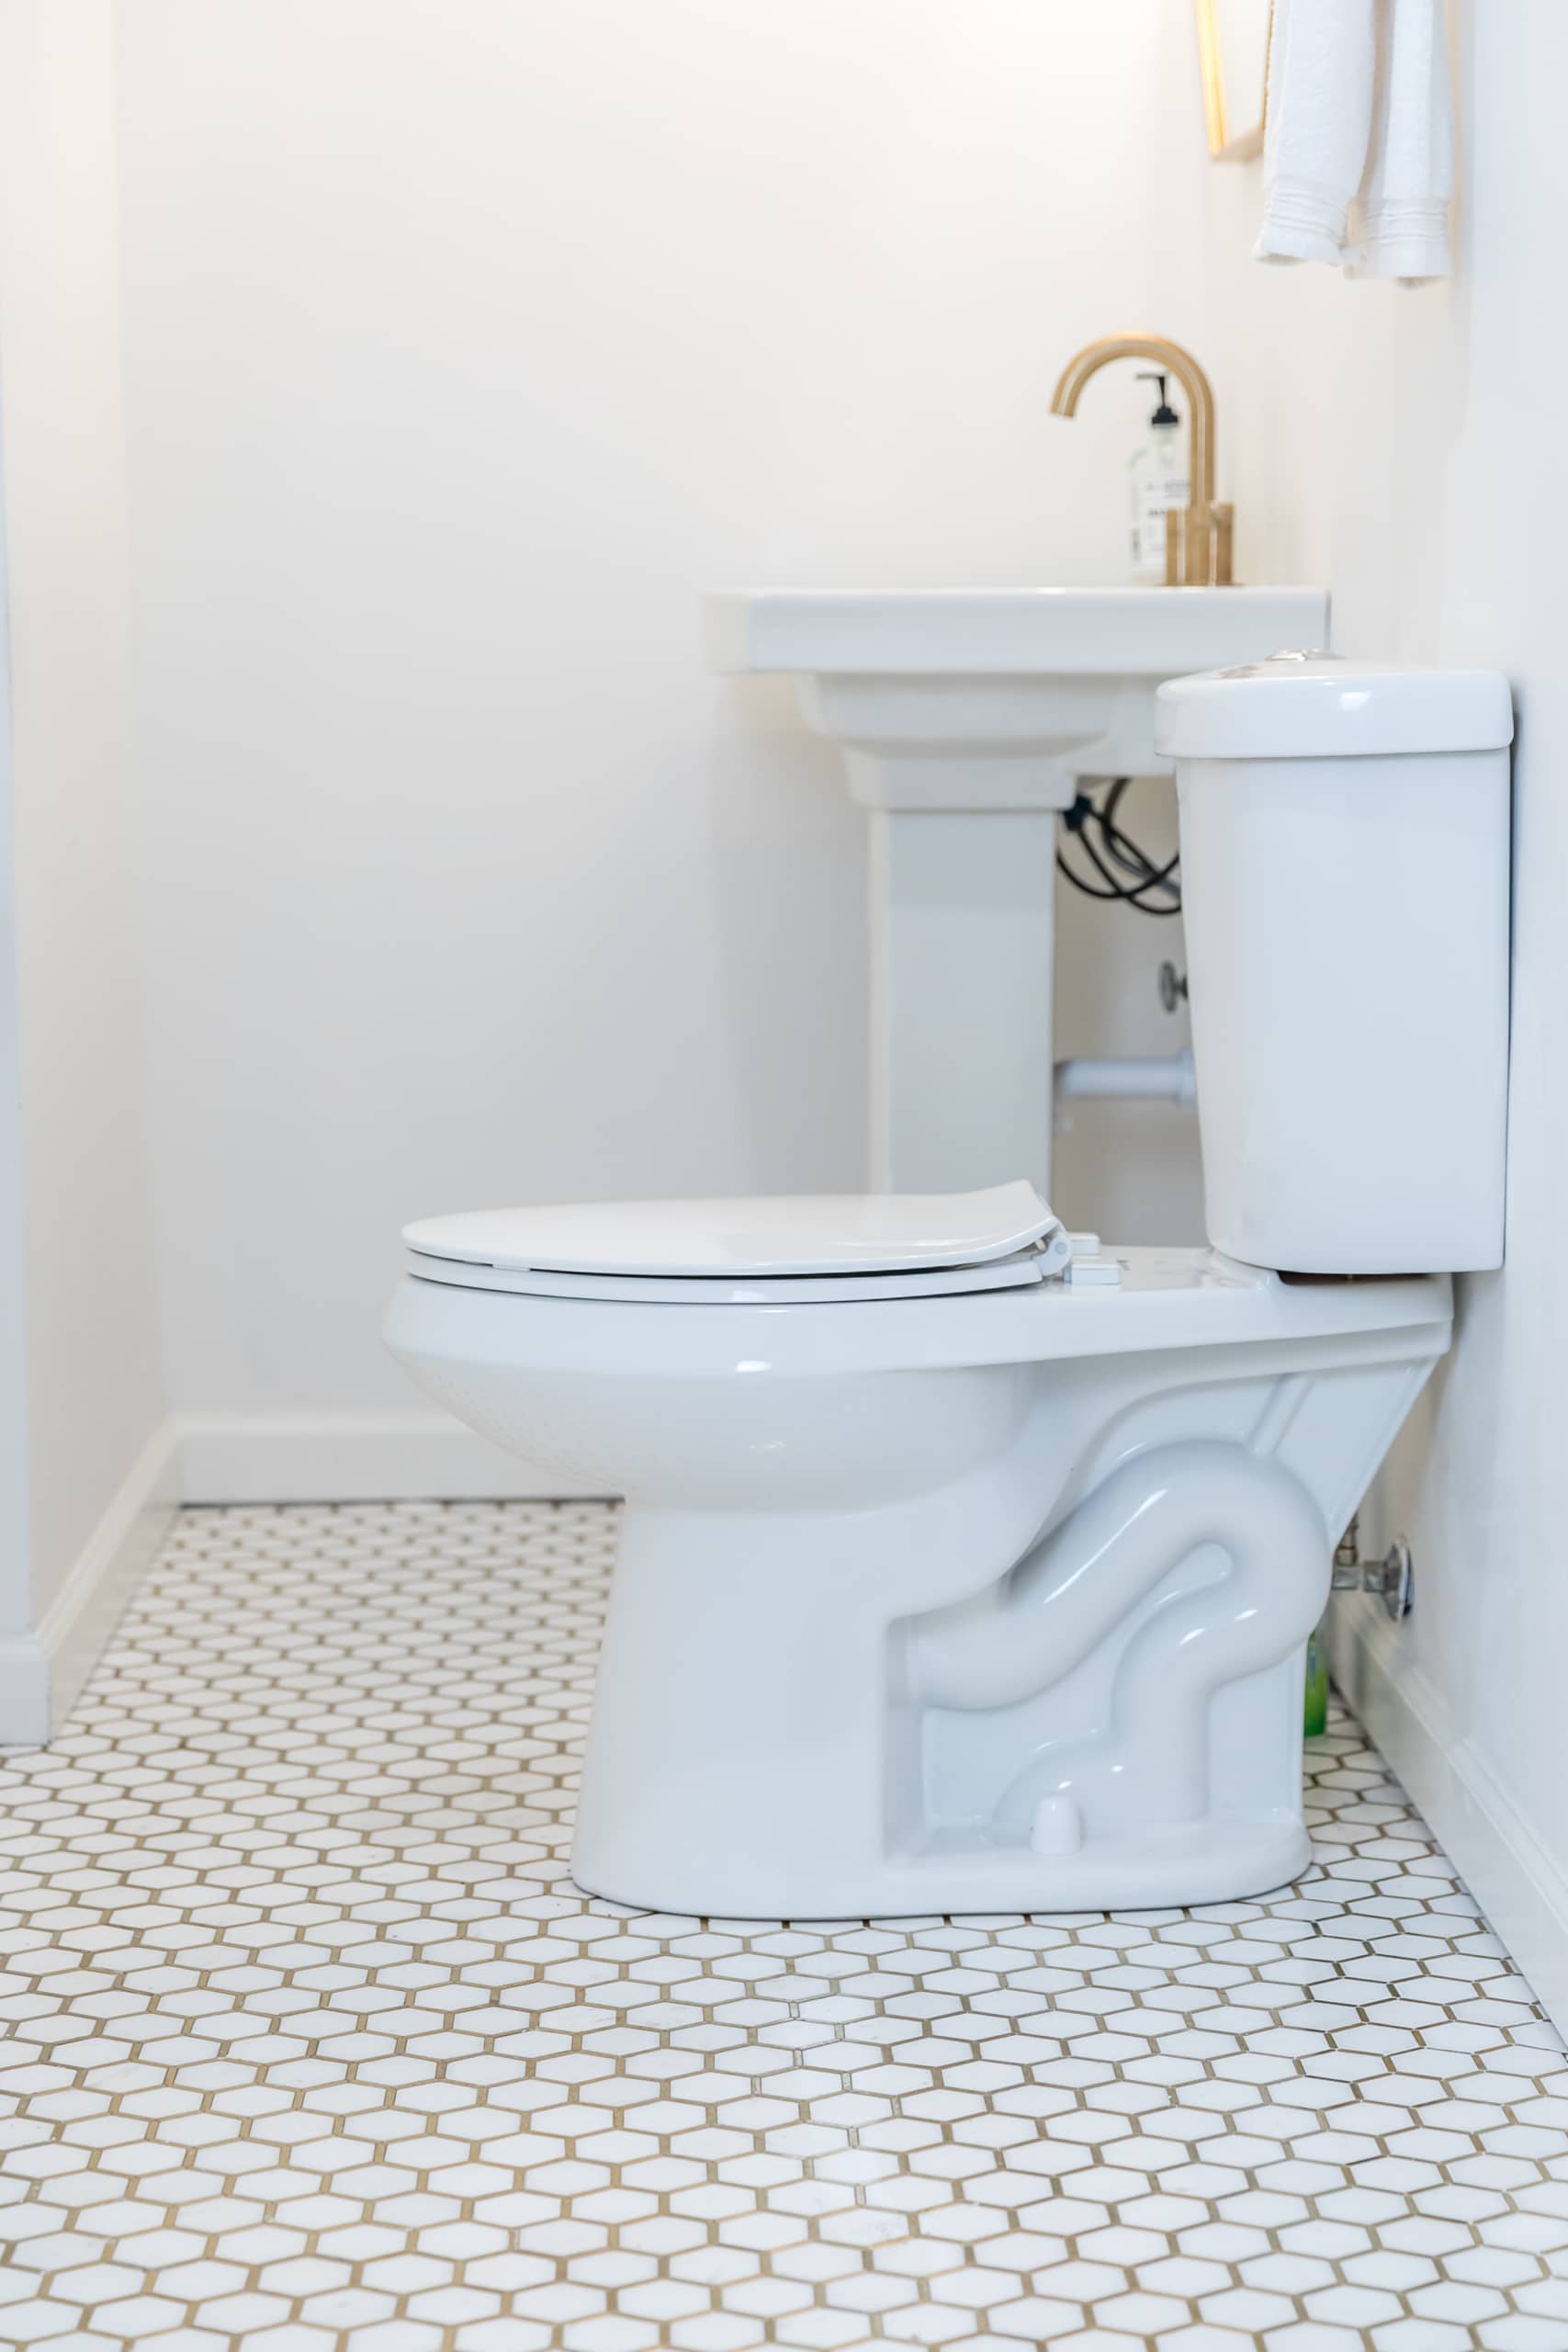 Photo of Residential Toilet from the side with a sink in the background